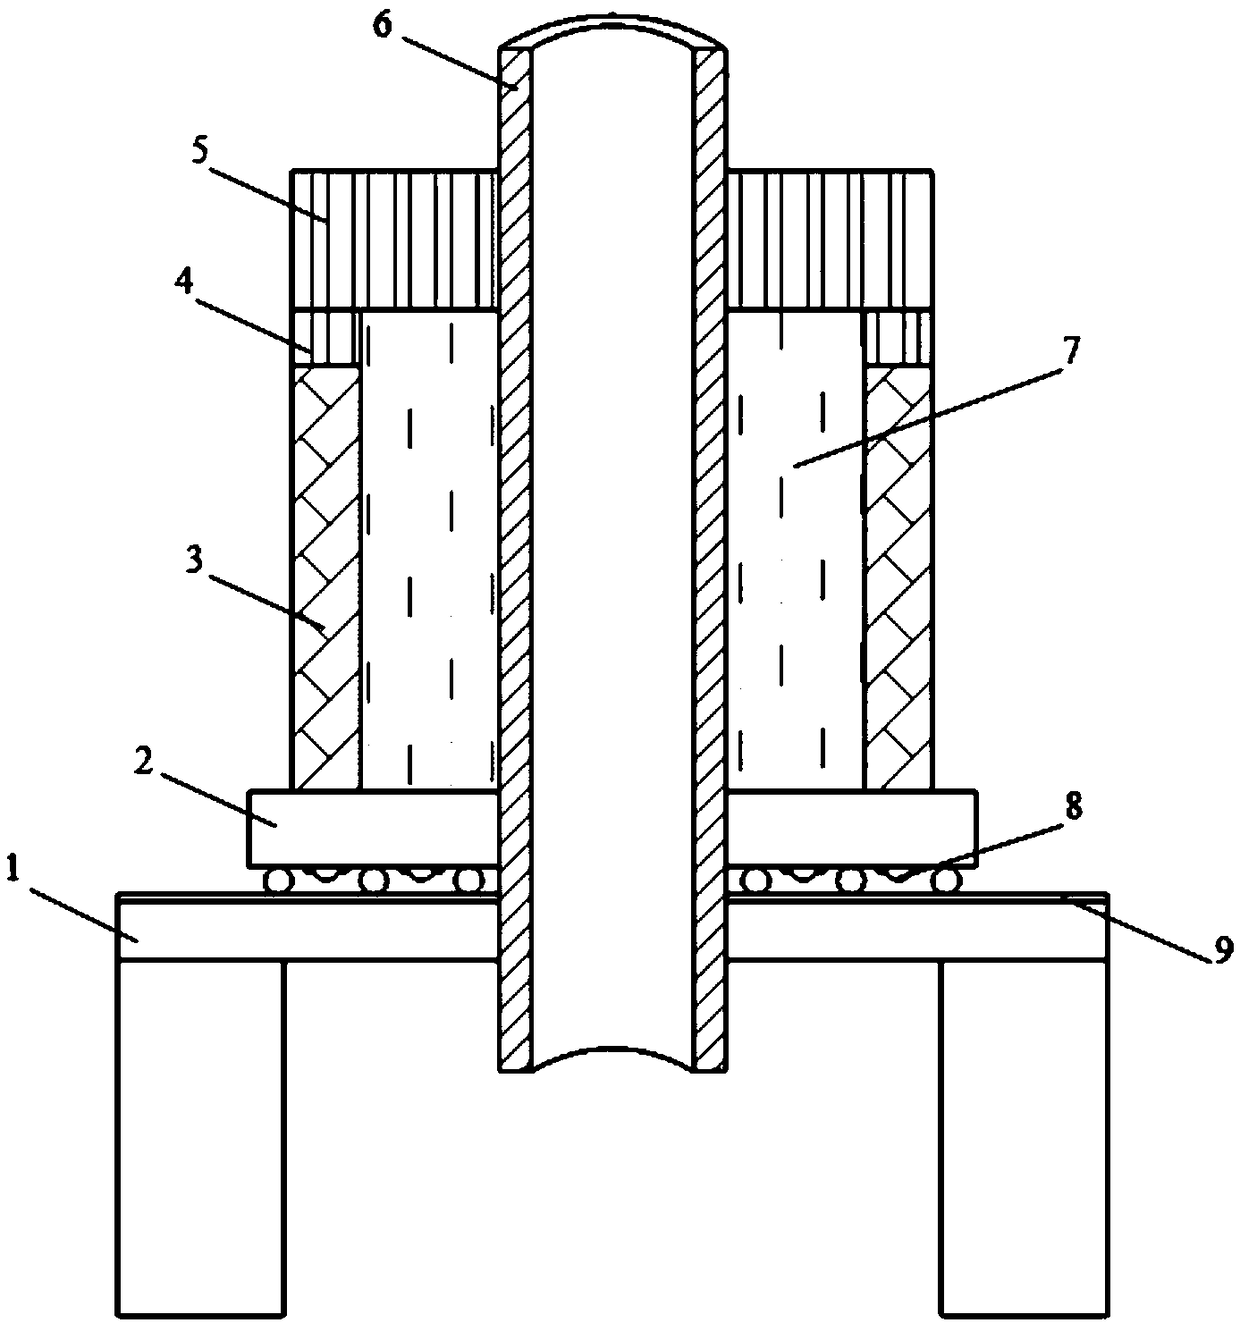 Roller roller-sleeve extrusion and vibration casting production method